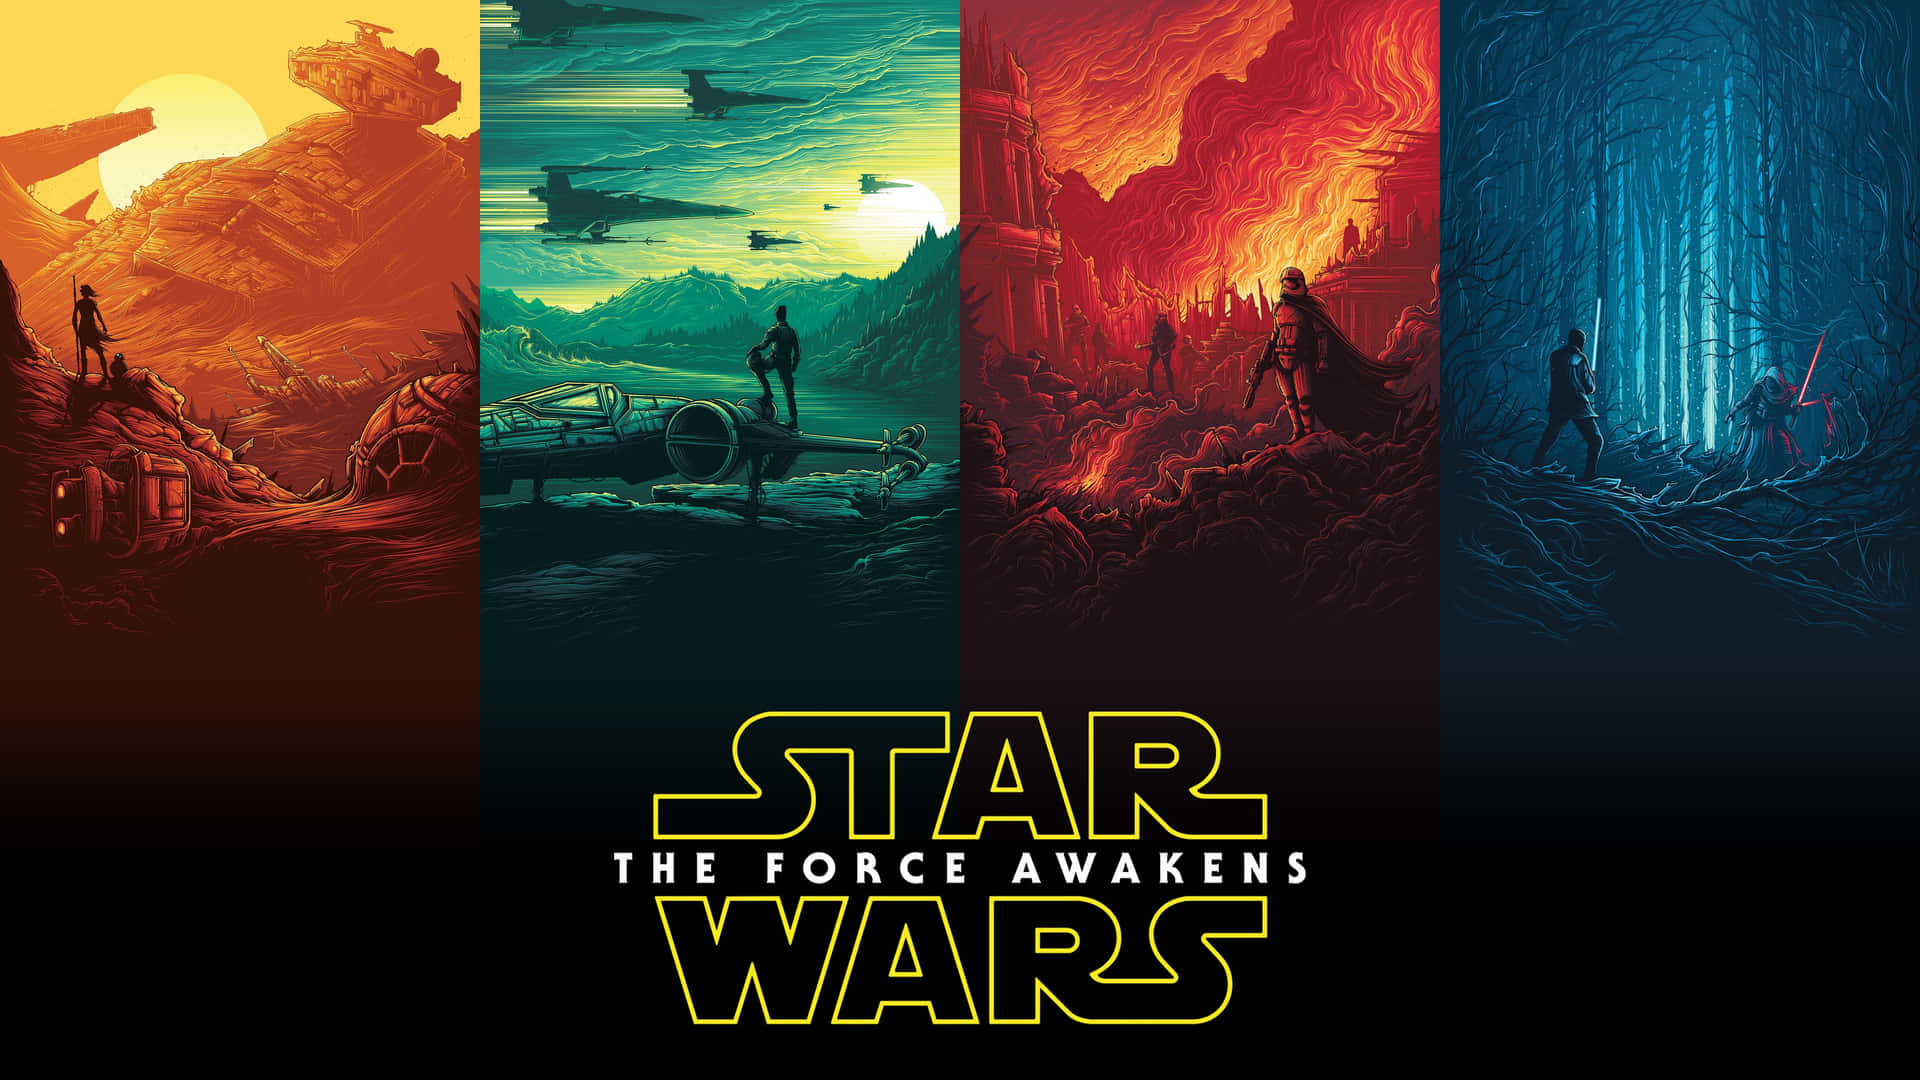 The Heroes of the Force Awakens Gather for a Final Showdown Wallpaper